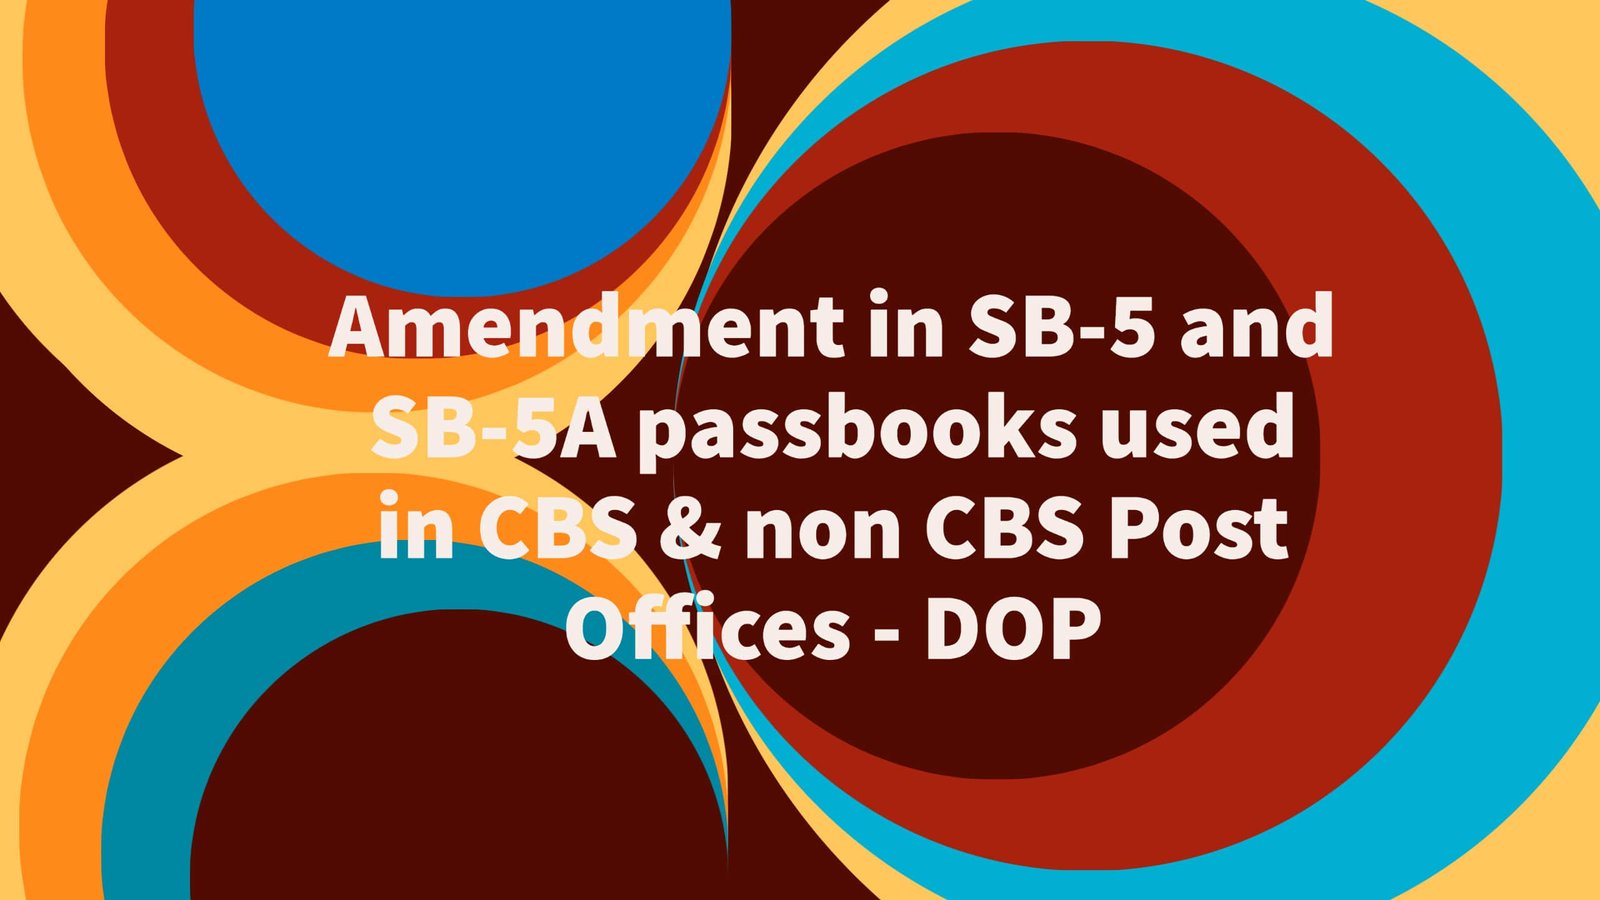 Amendment in SB-5 and SB-5A passbooks used in CBS & non CBS Post Offices - DOP